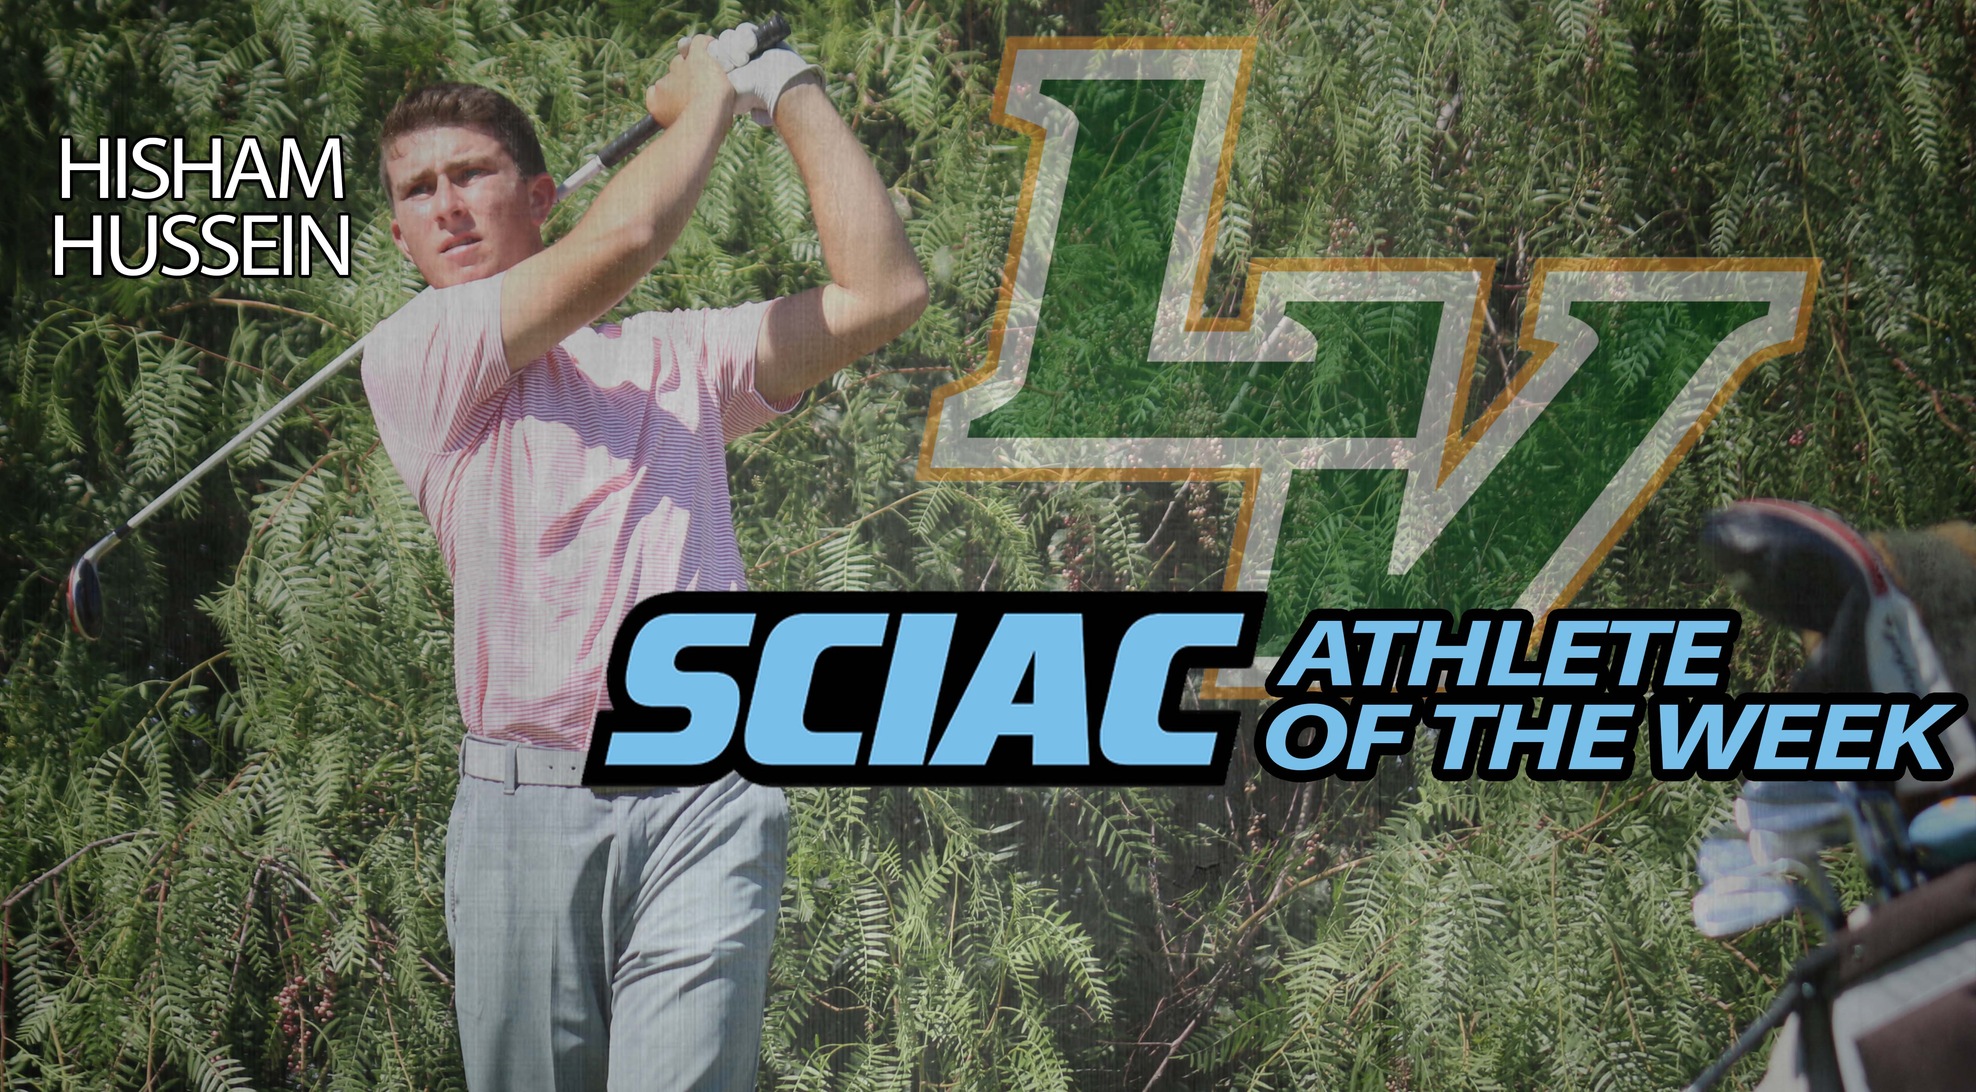 Hussein named SCIAC Athlete of the Week